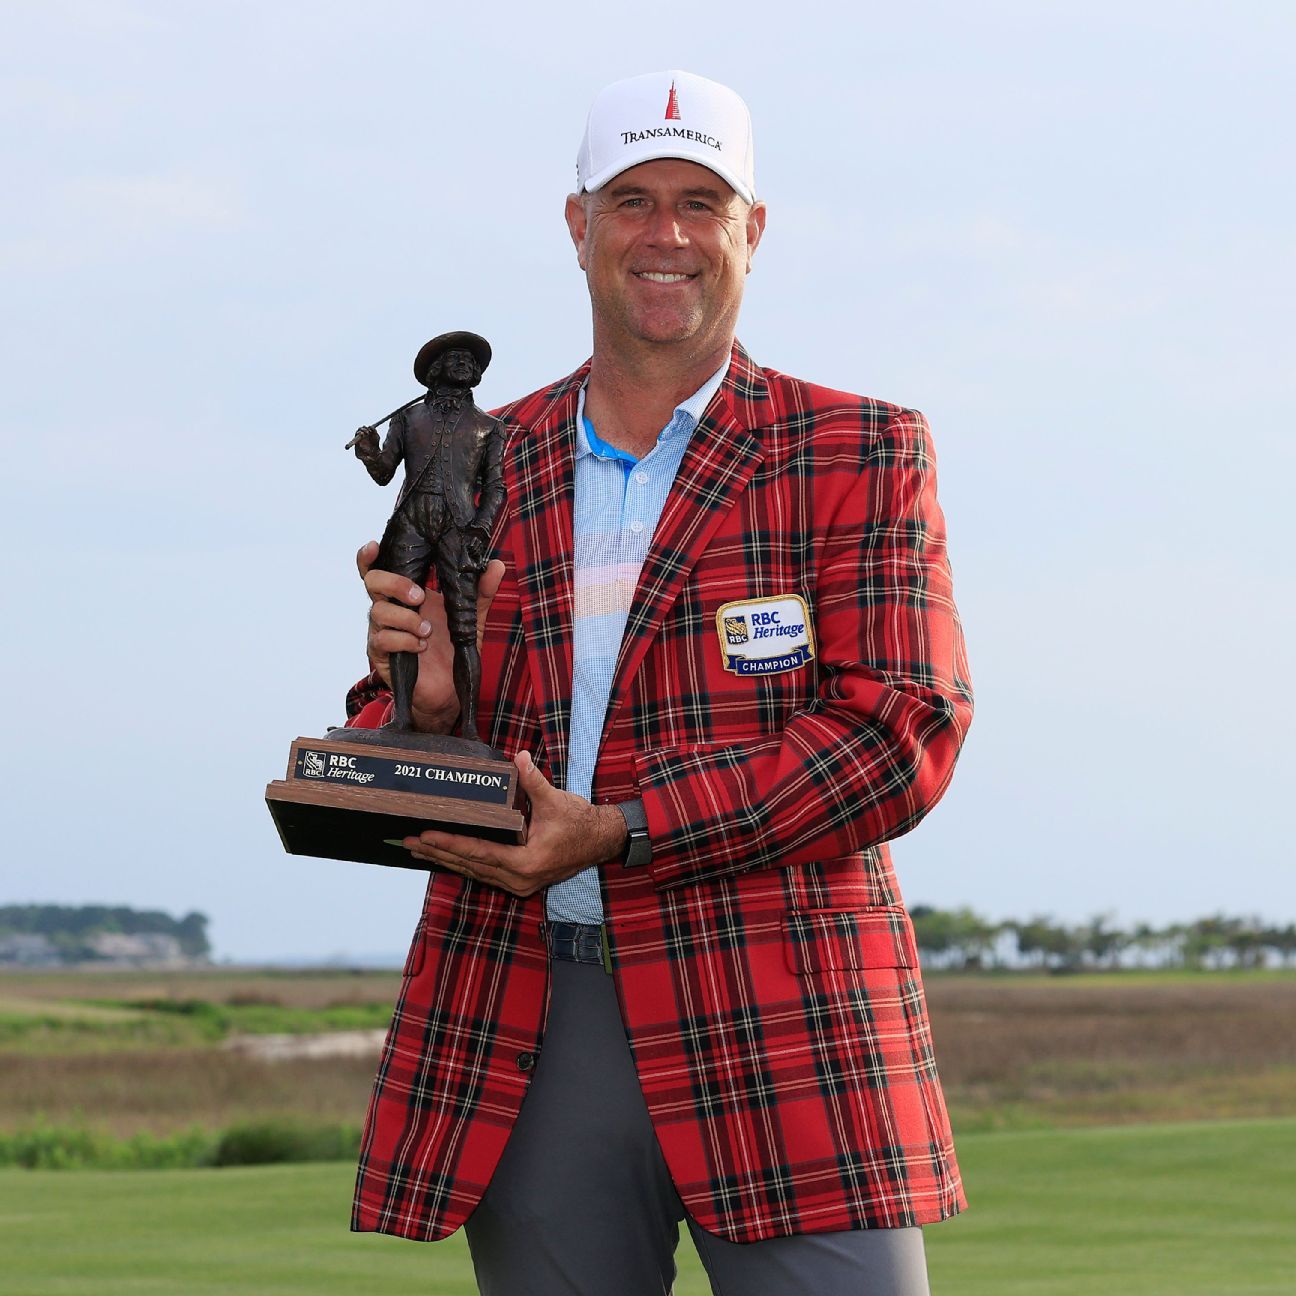 Stewart Cink holds the record for the week with the third RBC Heritage title